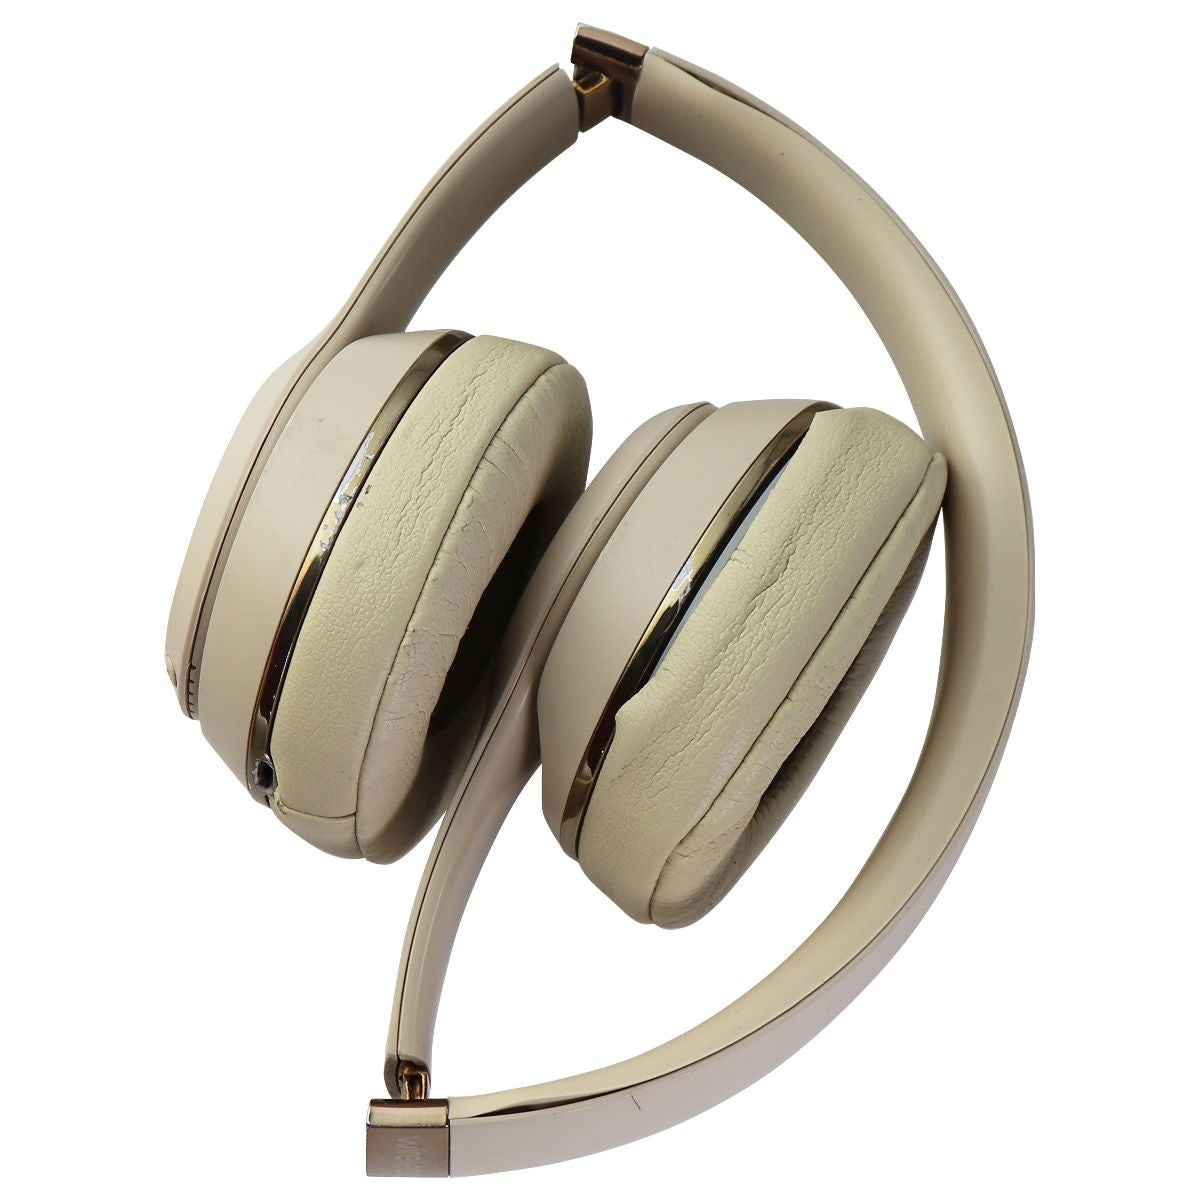 Beats by Dr. Dre Solo3 Wireless On-Ear Headphones - Satin Gold (MUH42LL/A) Portable Audio - Headphones Beats by Dr. Dre    - Simple Cell Bulk Wholesale Pricing - USA Seller